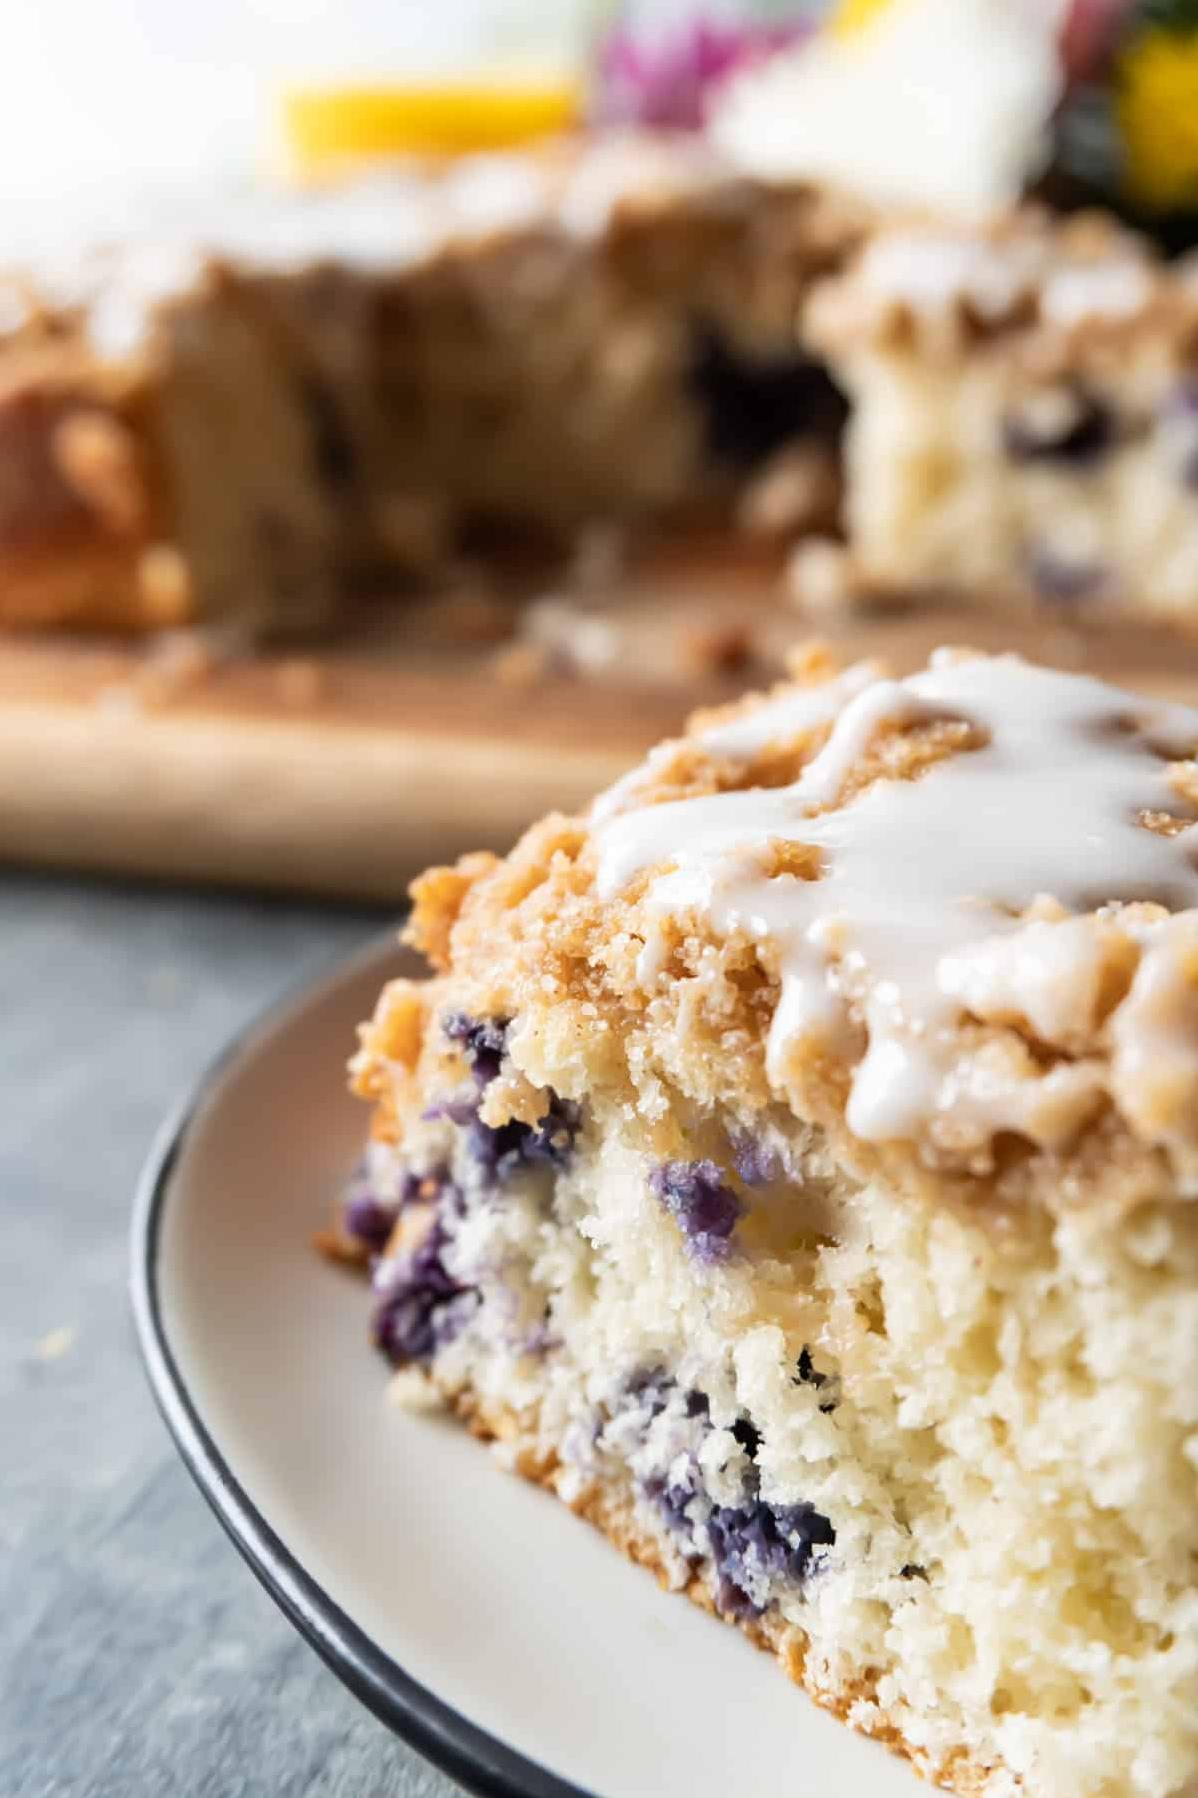  Golden brown and bursting with juicy blueberries